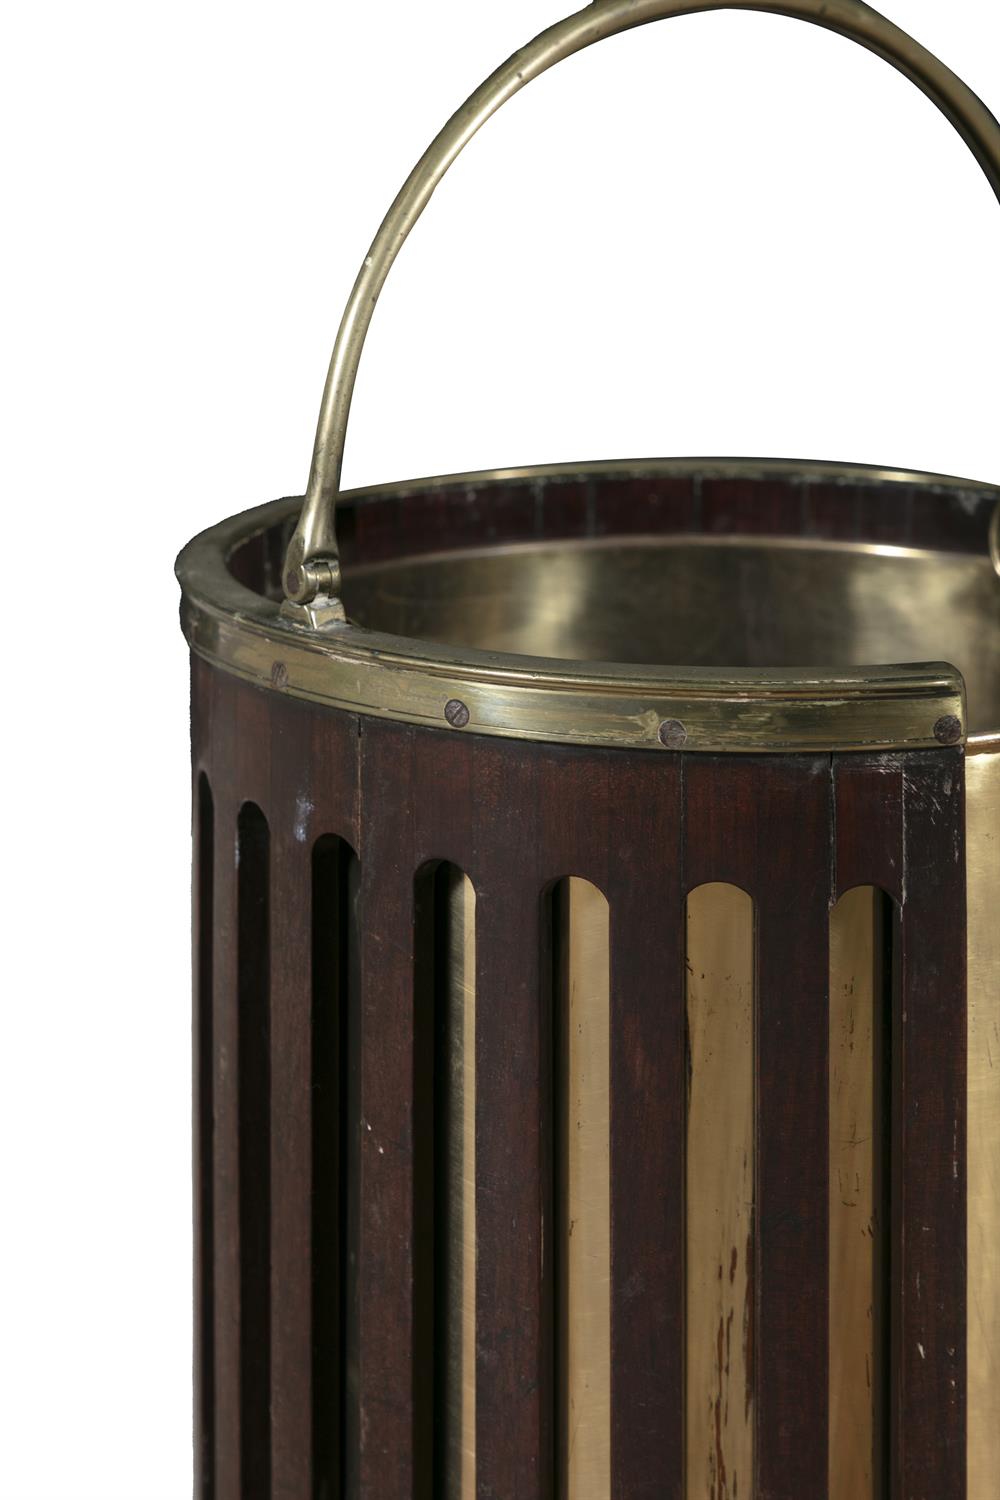 A PAIR OF GEORGE III MAHOGANY AND BRASS BOUND PLATE BUCKETS with arched swing handle and - Image 4 of 4